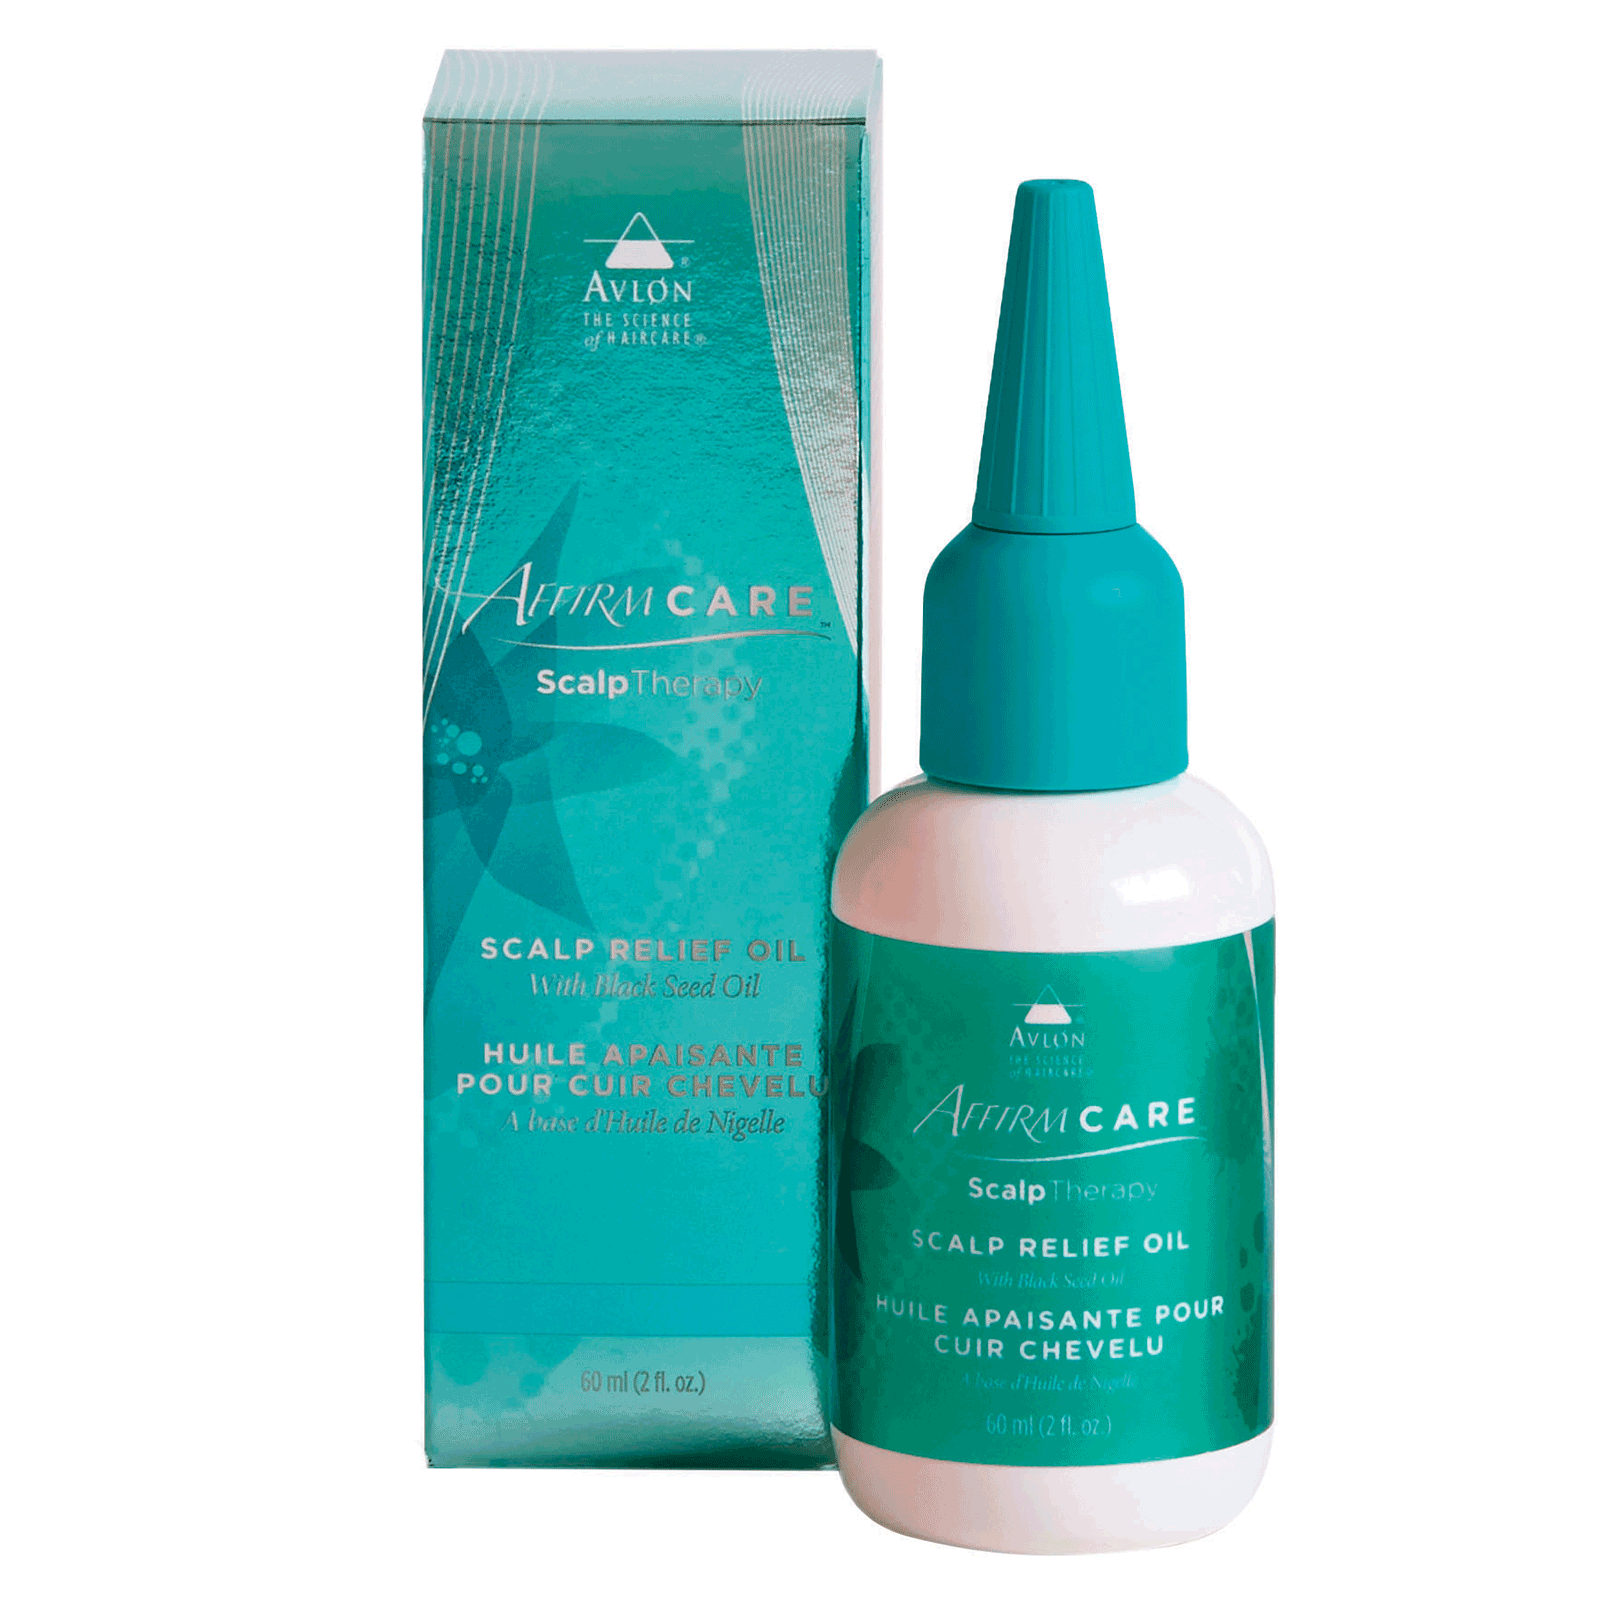 AffirmCare ScalpTherapy - Scalp Relief Oil